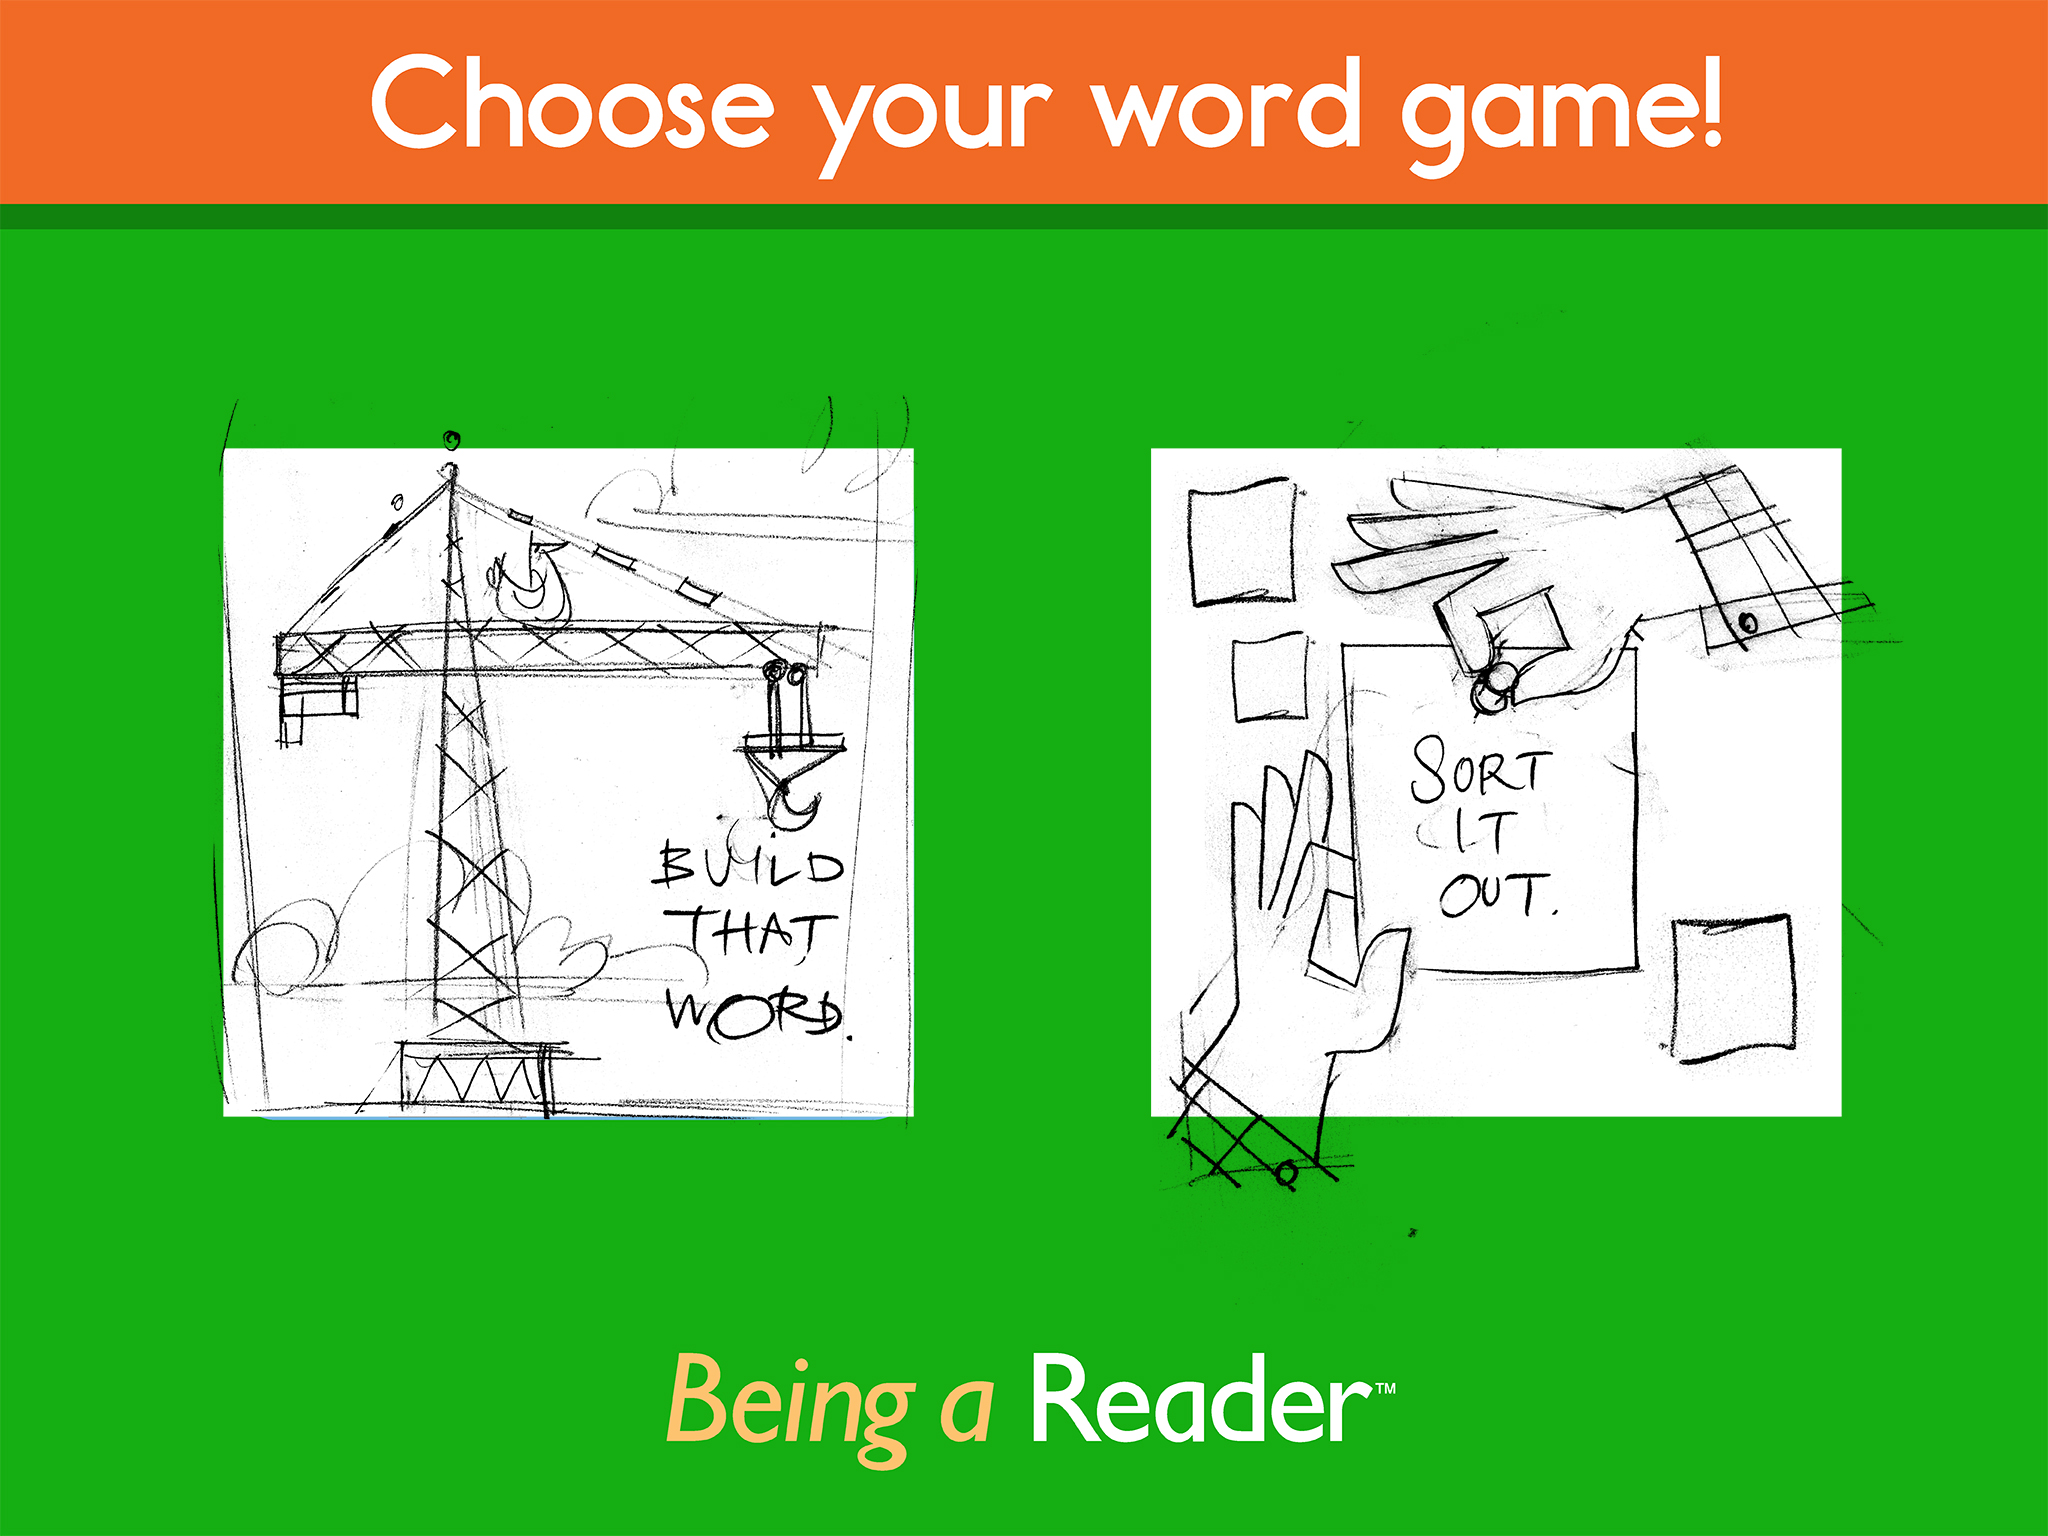 word game app screen wireframe